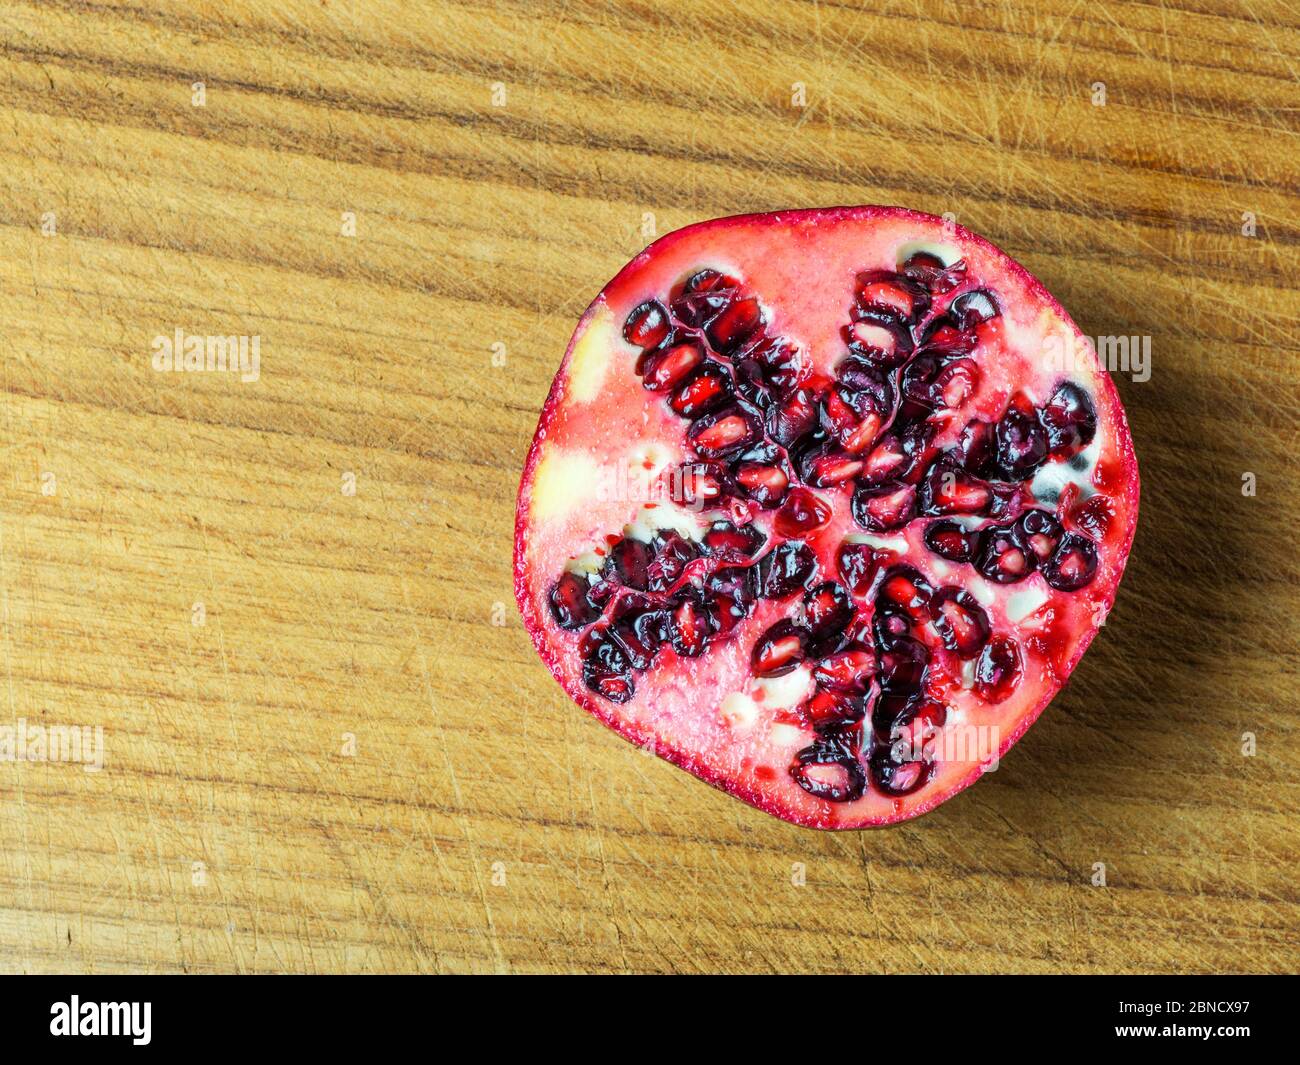 Half a fresh pomegranate on a wooden chopping board with copy space Stock Photo